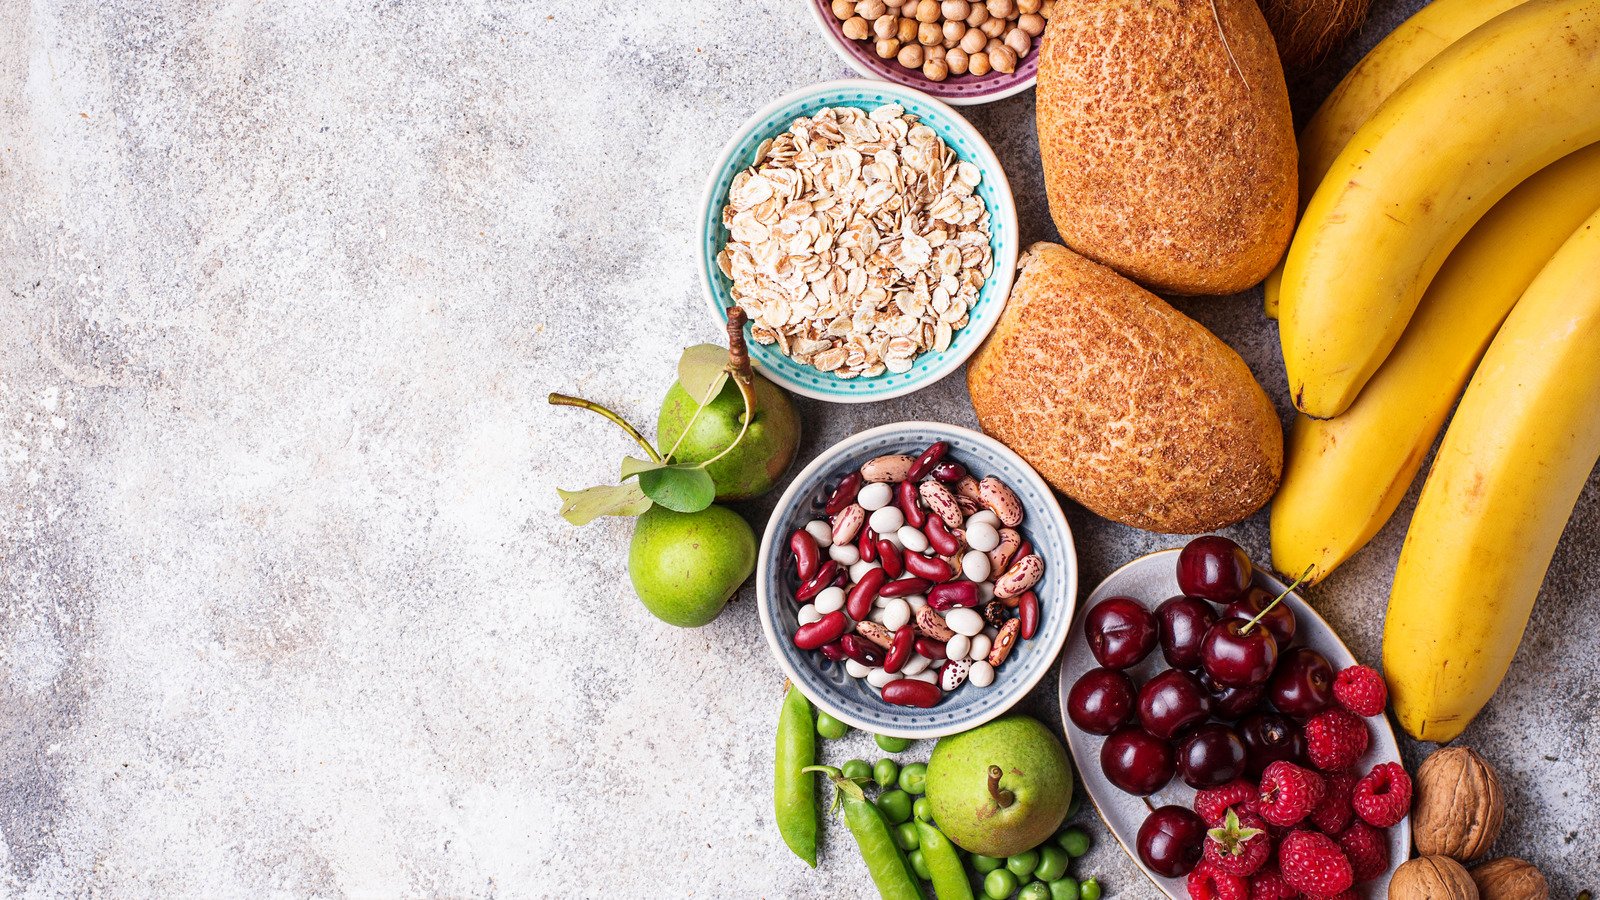 When You Eat Too Much Fiber, This Is What Happens - Health Digest